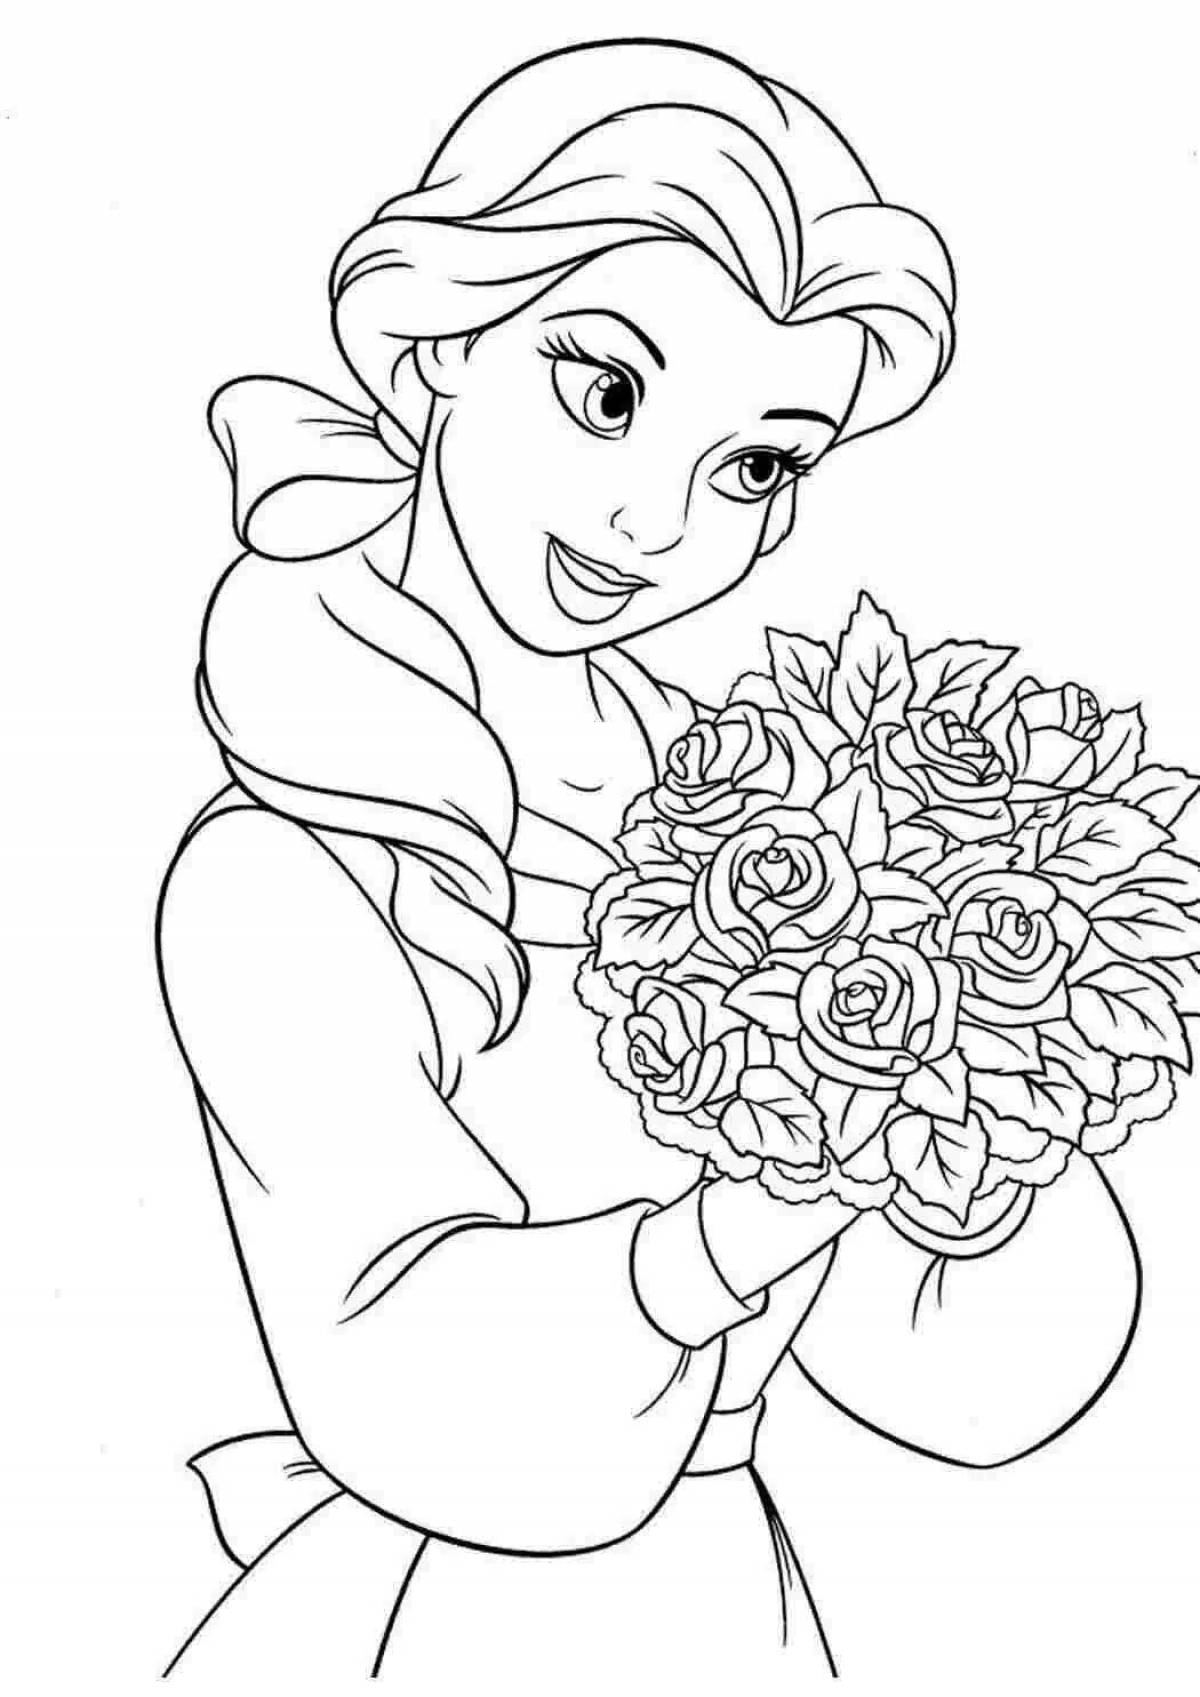 Printable colorful journey coloring page